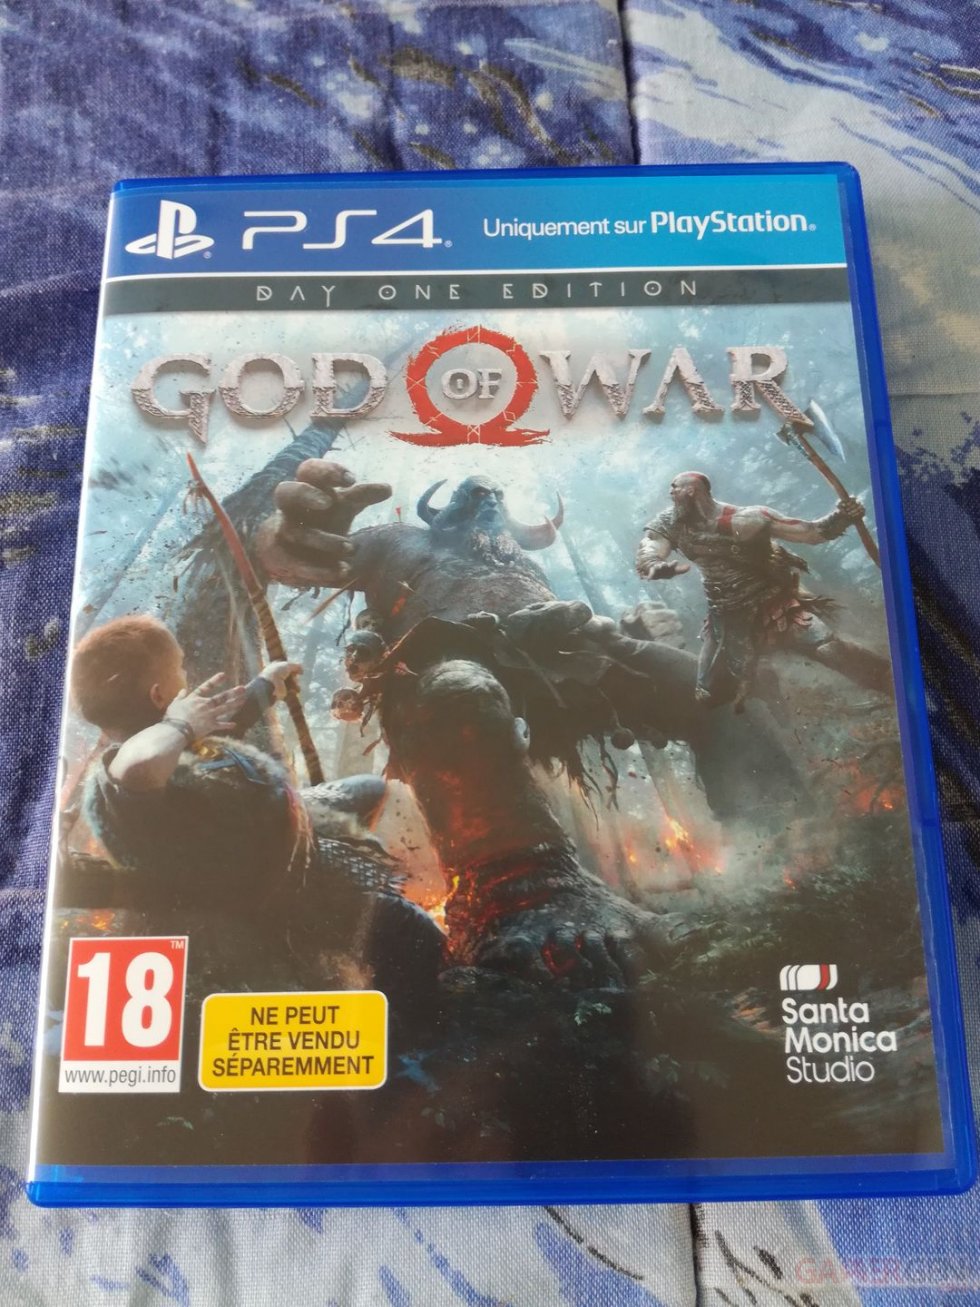 PS4-Pro-Leviathan-Grey-collector-God-of-War-unboxing-déballage-16-19-04-2018